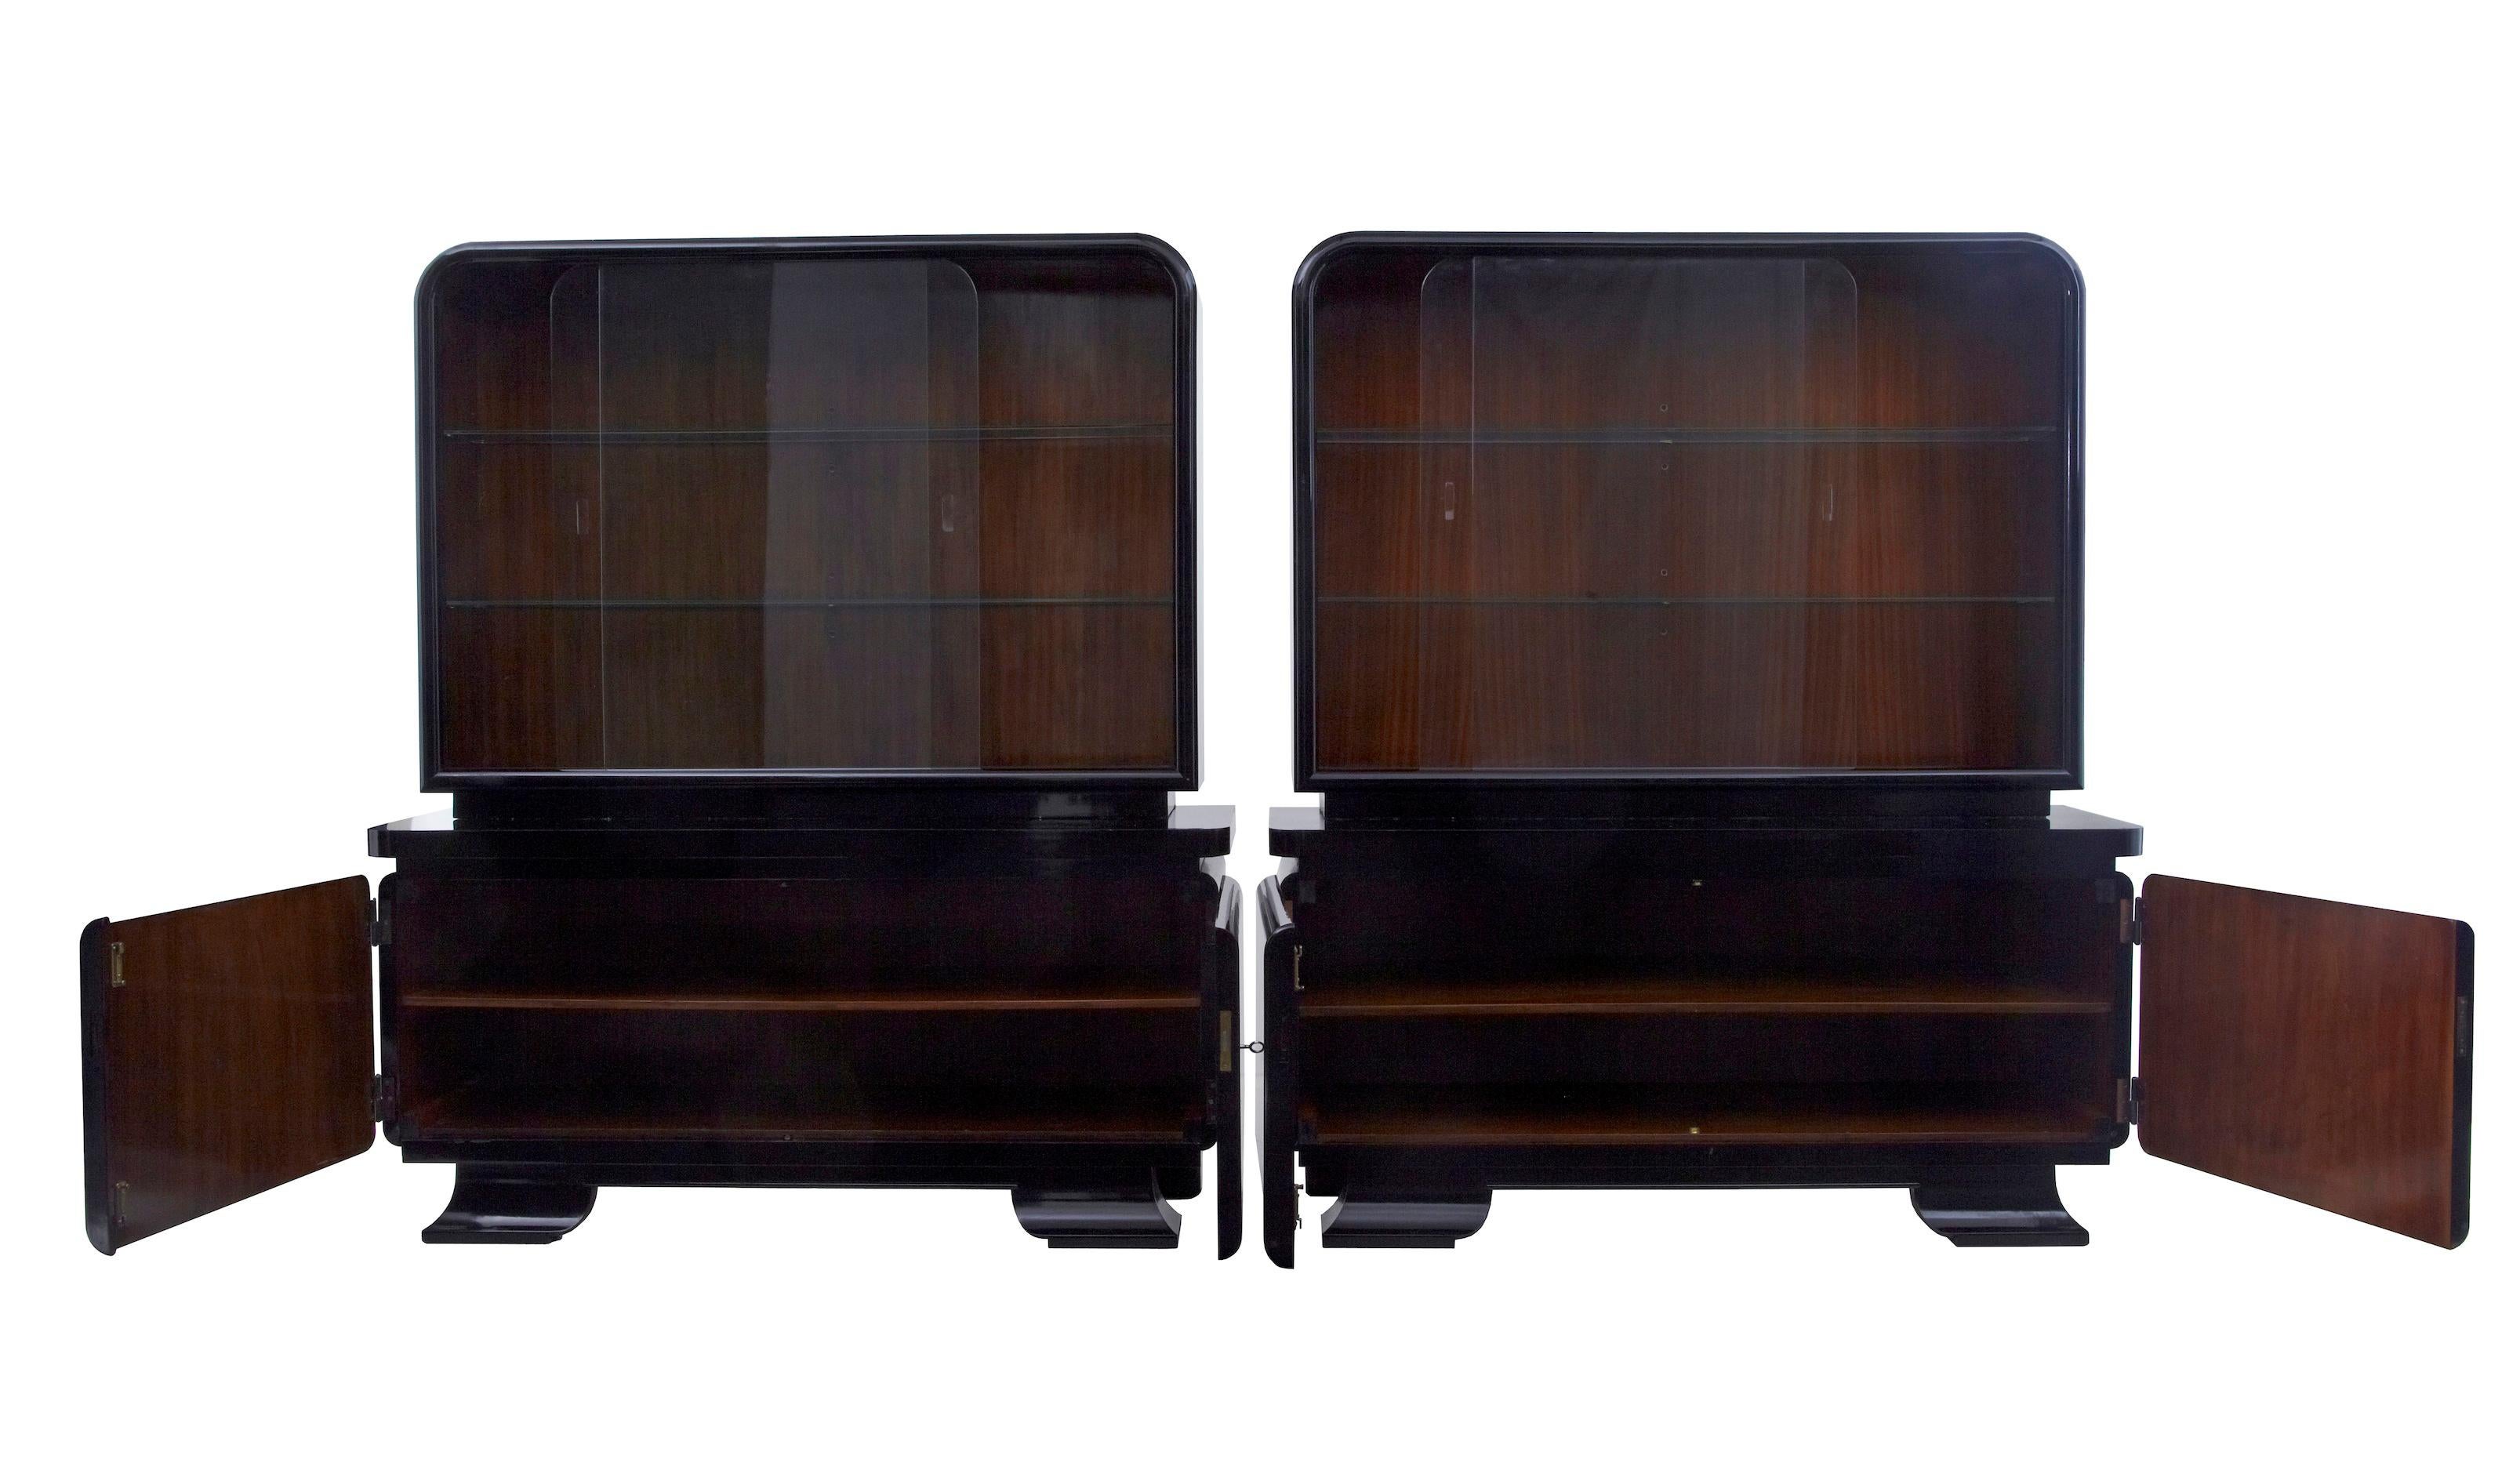 Stunning pair of art deco black lacquered sideboard vitrines, circa 1930.

Debenham antiques are proud to offer a premium pair of stylish art deco cabinet / vitrines, circa 1930. Comprising of 2 parts. Finished in black lacquer with contrasting